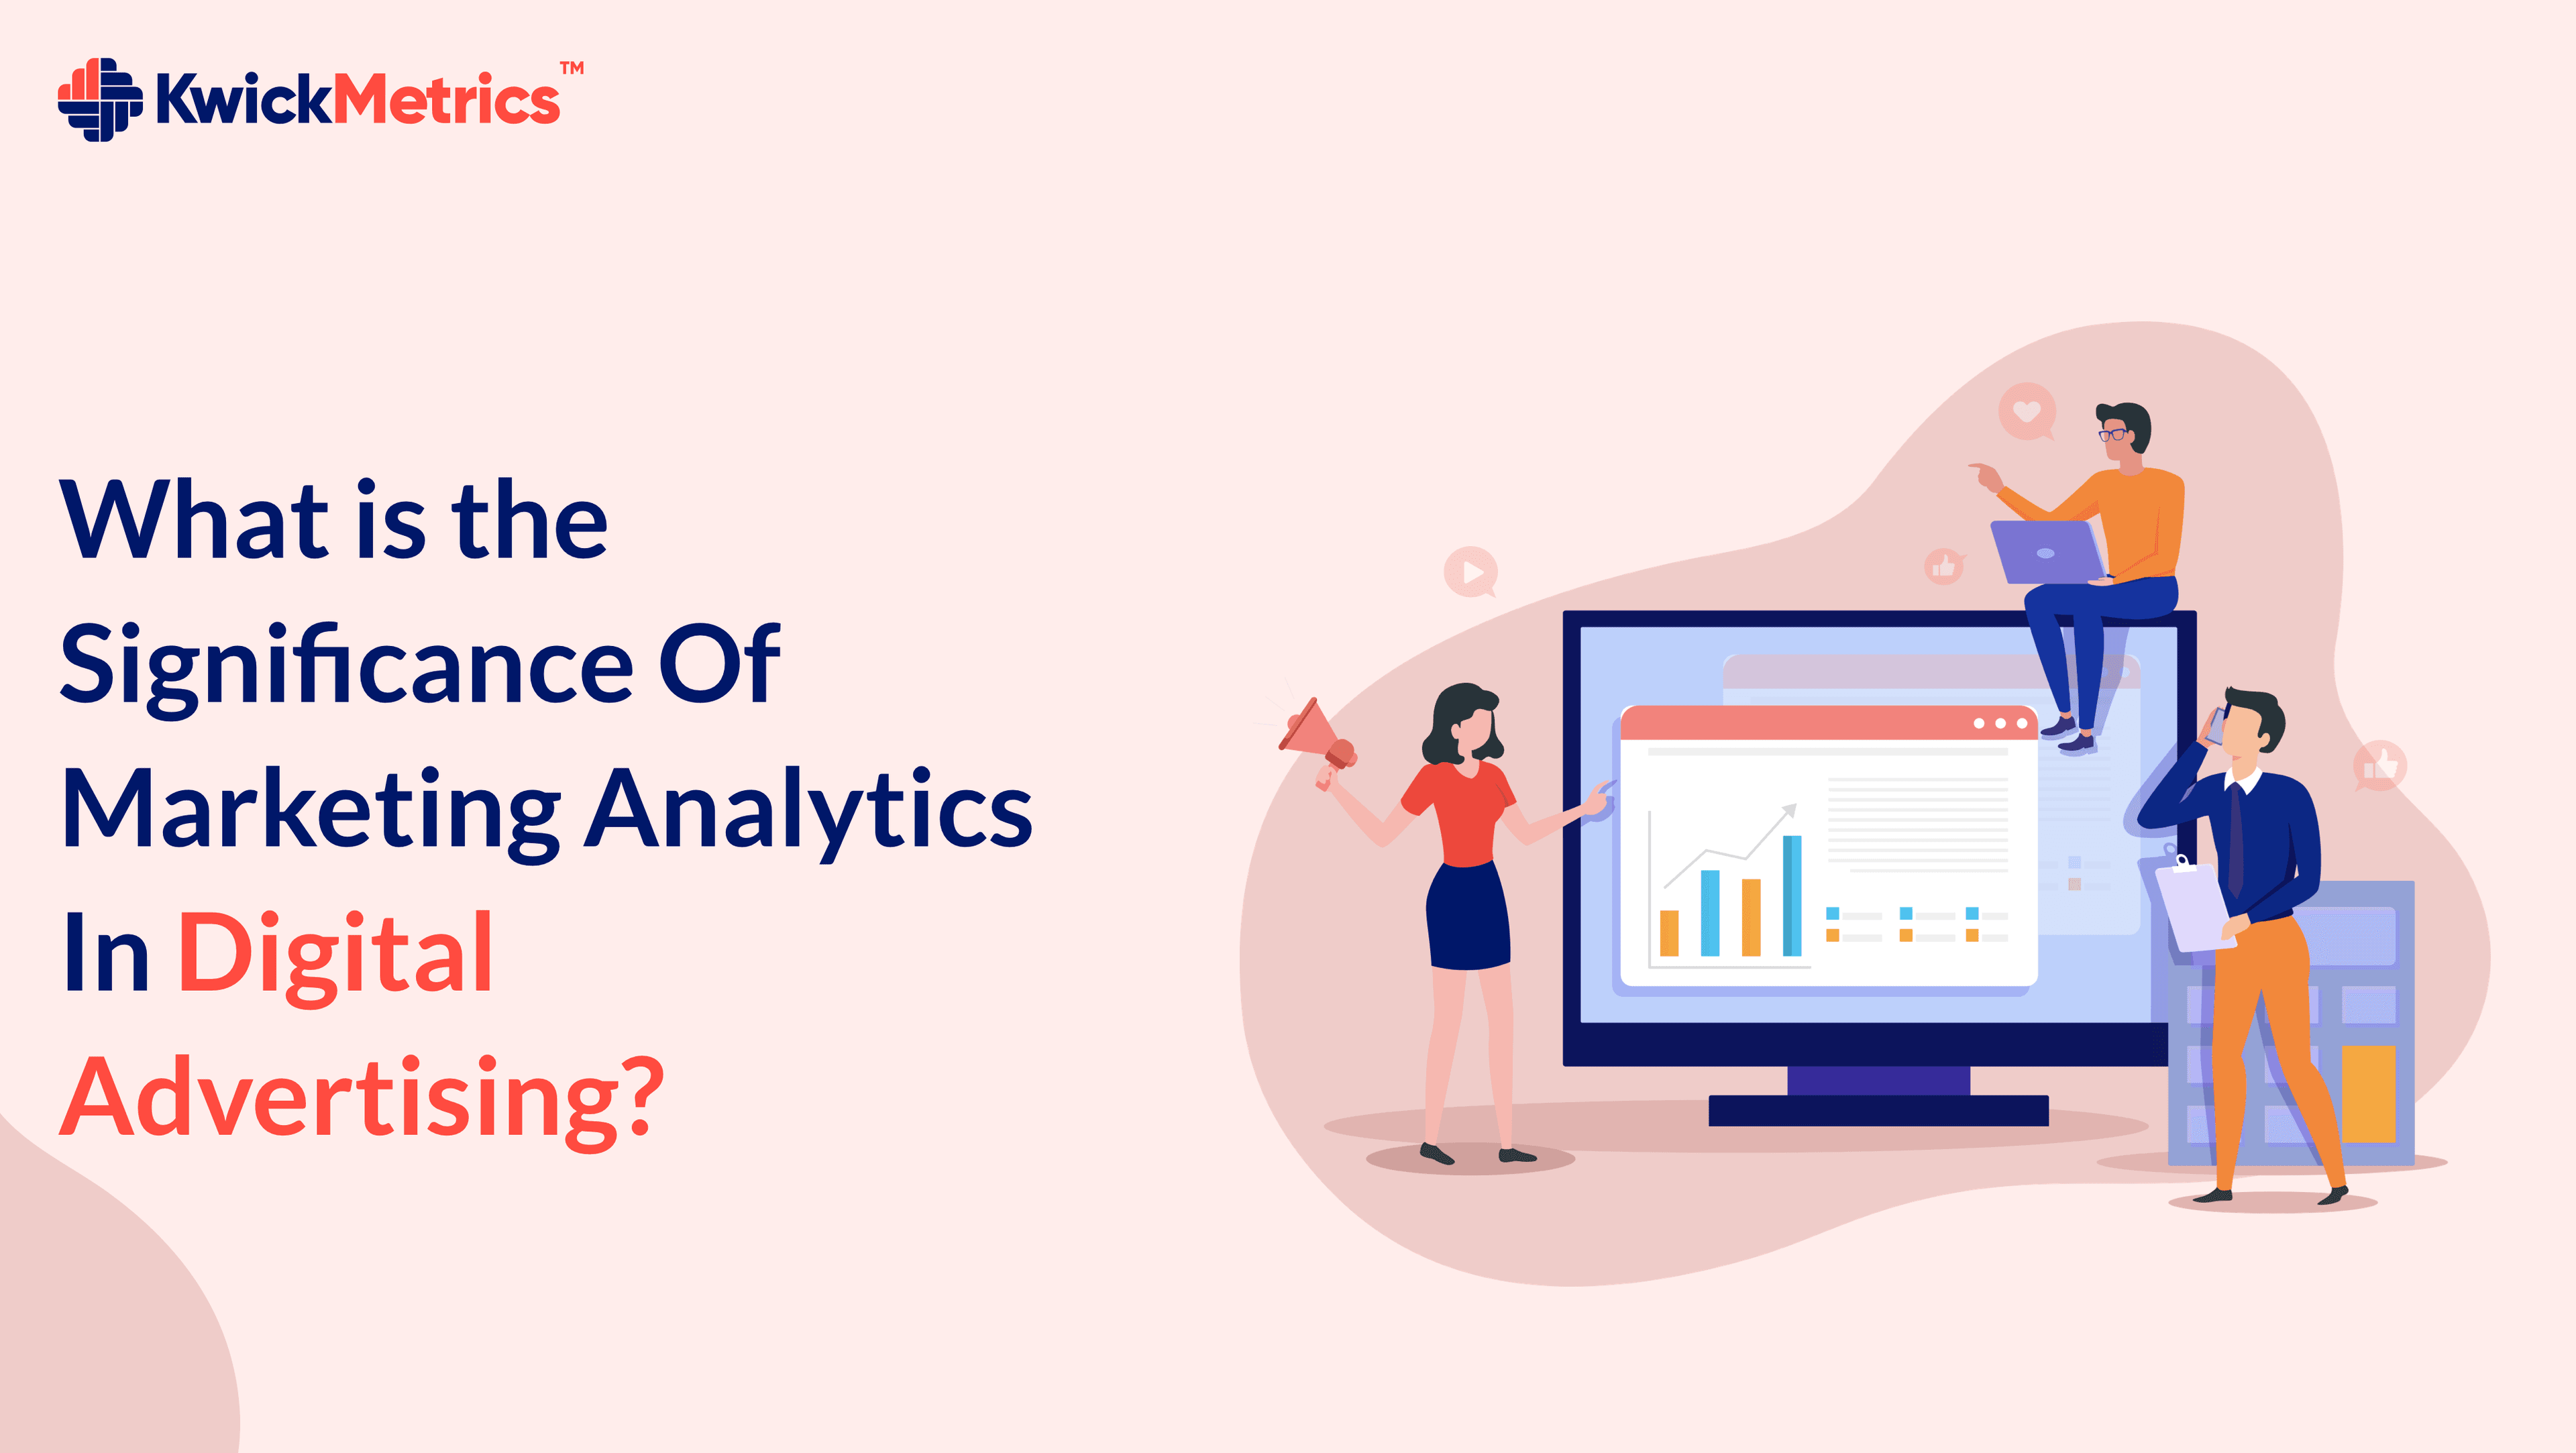 Significance Of Marketing Analytics In Digital Advertising